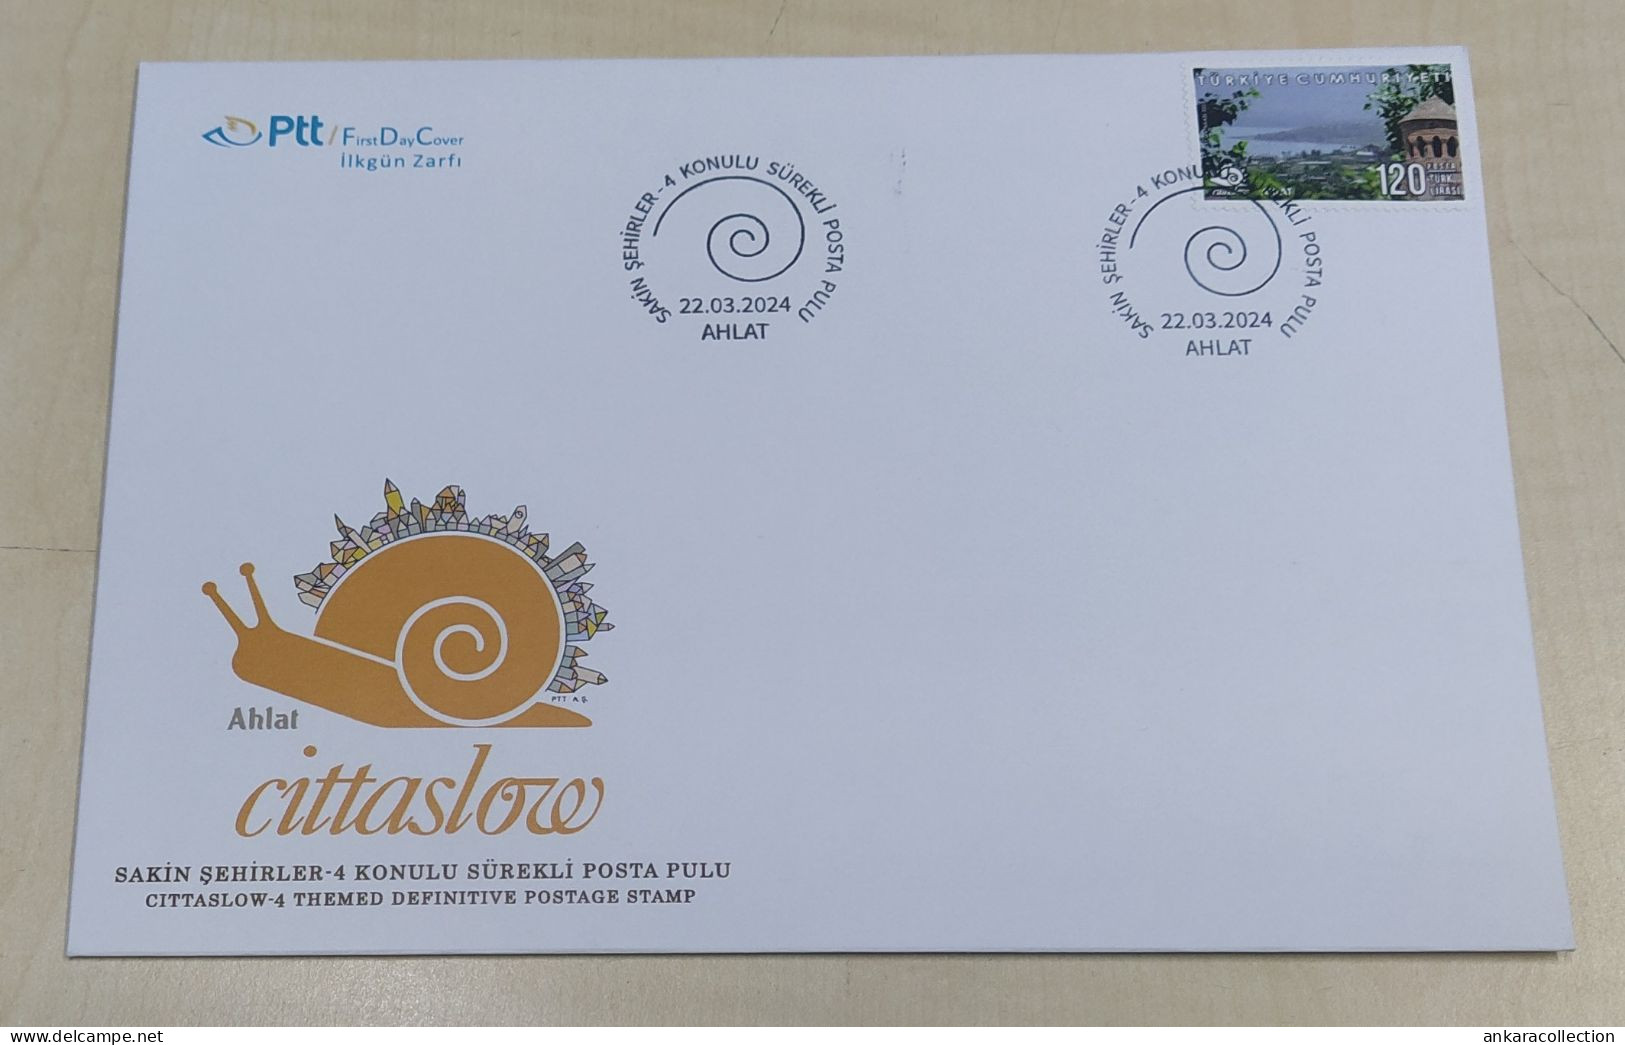 AC - TURKEY FDC  THE  DEFINITIVE POSTAGE STAMP WITH THE THEME OF CITTASLOW-4  22 MARCH 2024 - FDC